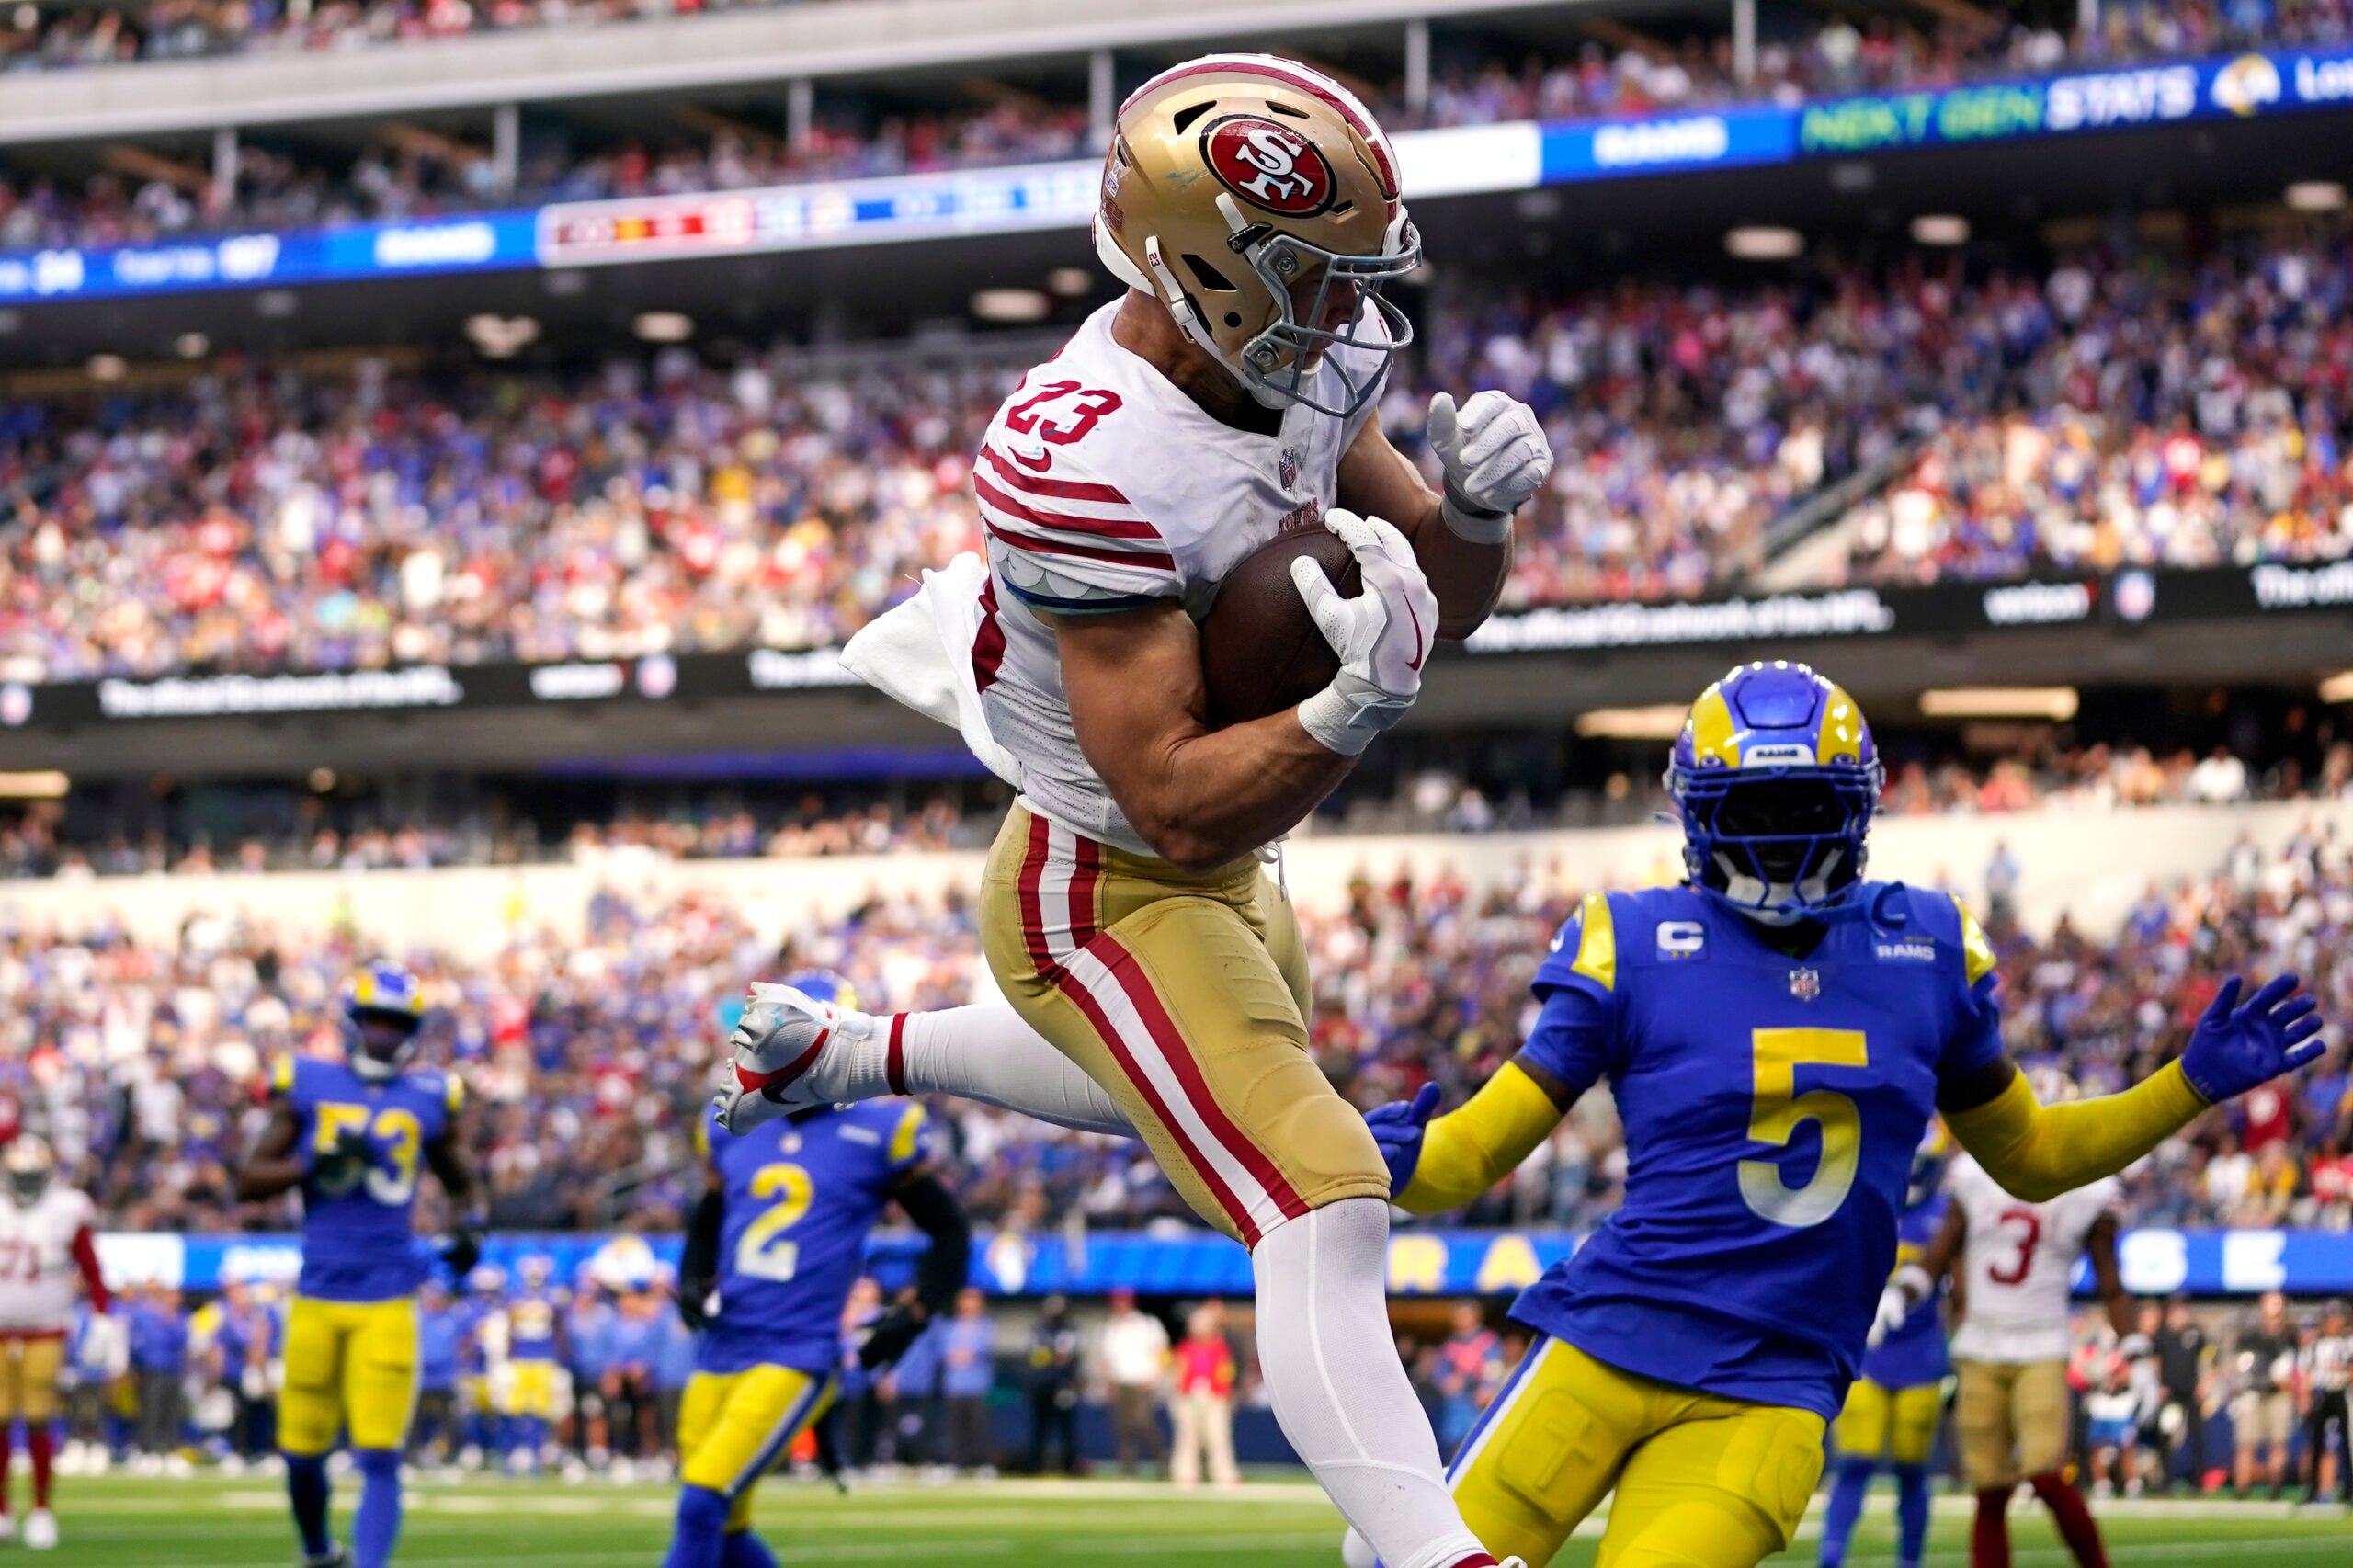 San Francisco 49ers running back Christian McCaffrey, center, comes down after making a touchdown catch as Los Angeles Rams cornerback Jalen Ramsey, right, watches during the second half of an NFL football game Sunday, Oct. 30, 2022, in Inglewood, Calif.